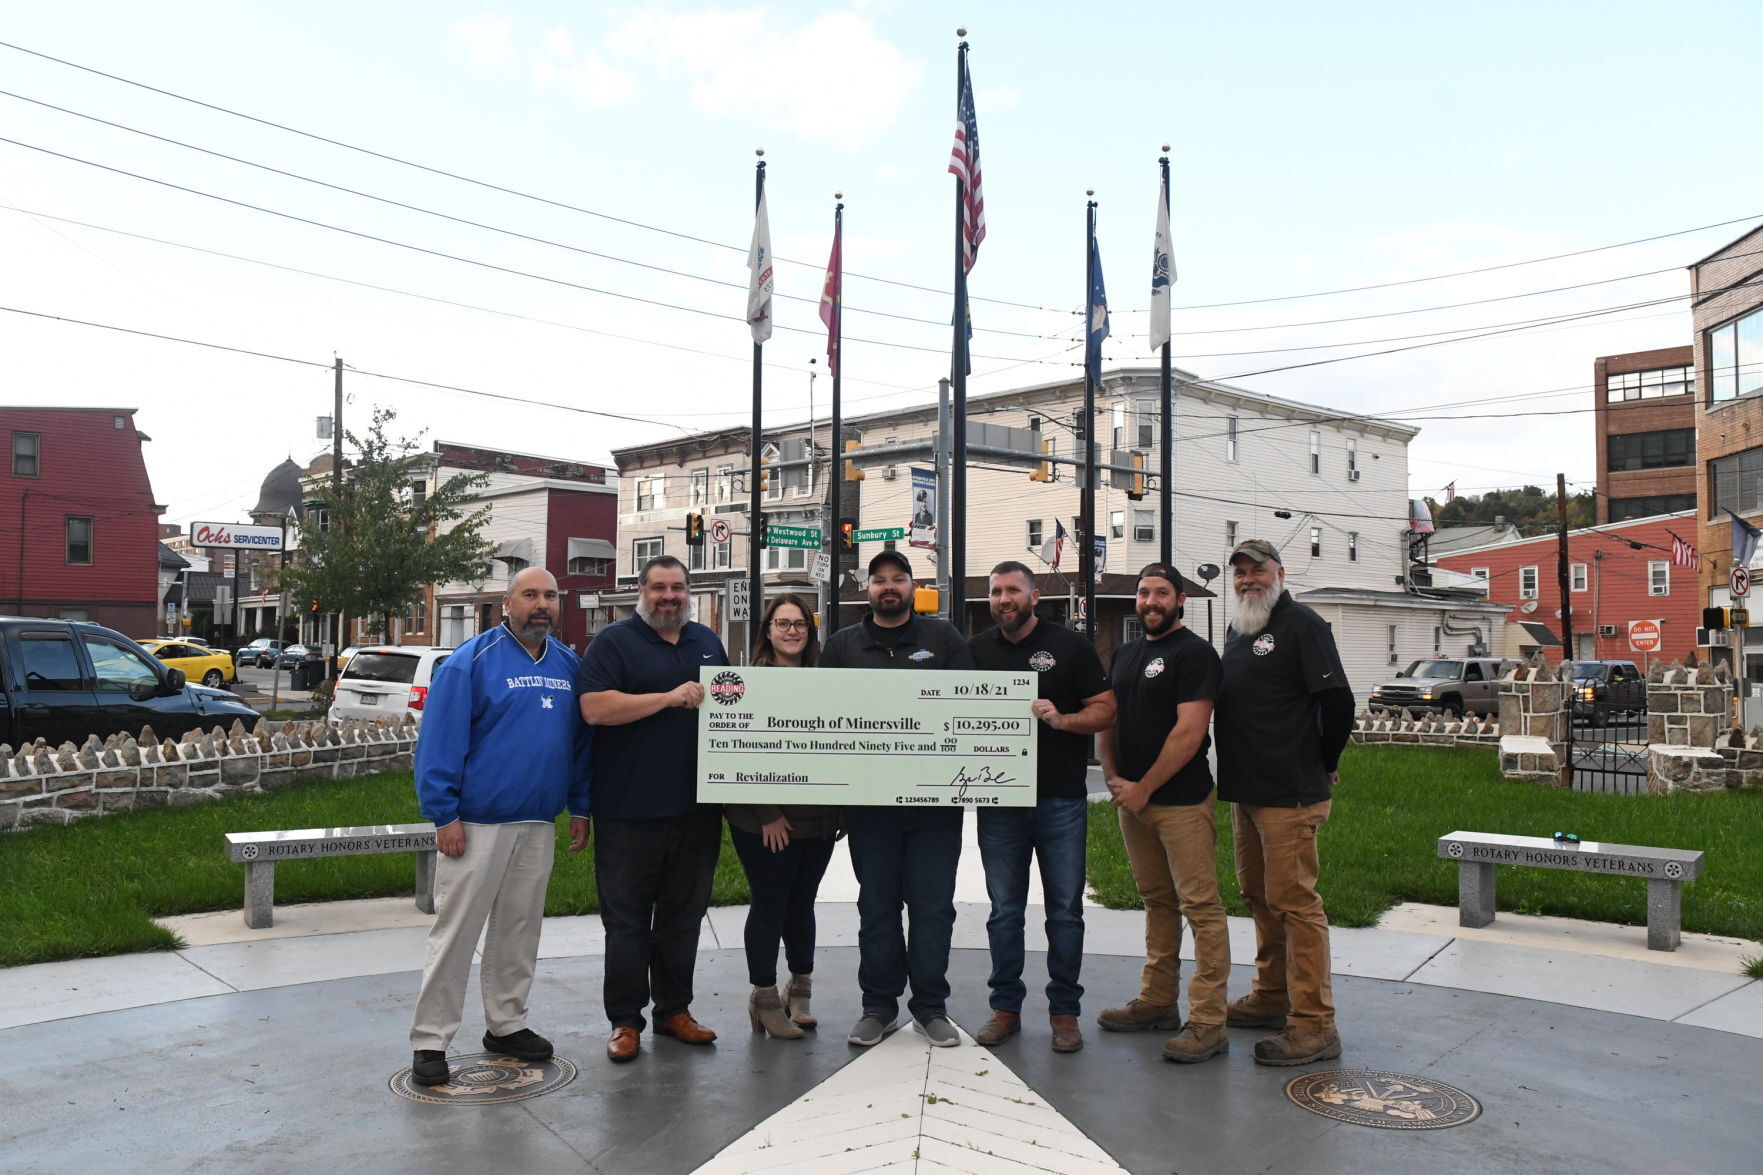 Famous Reading Outdoors (FRO) - Over $10,000 in proceeds from ATV run presented to Minersville